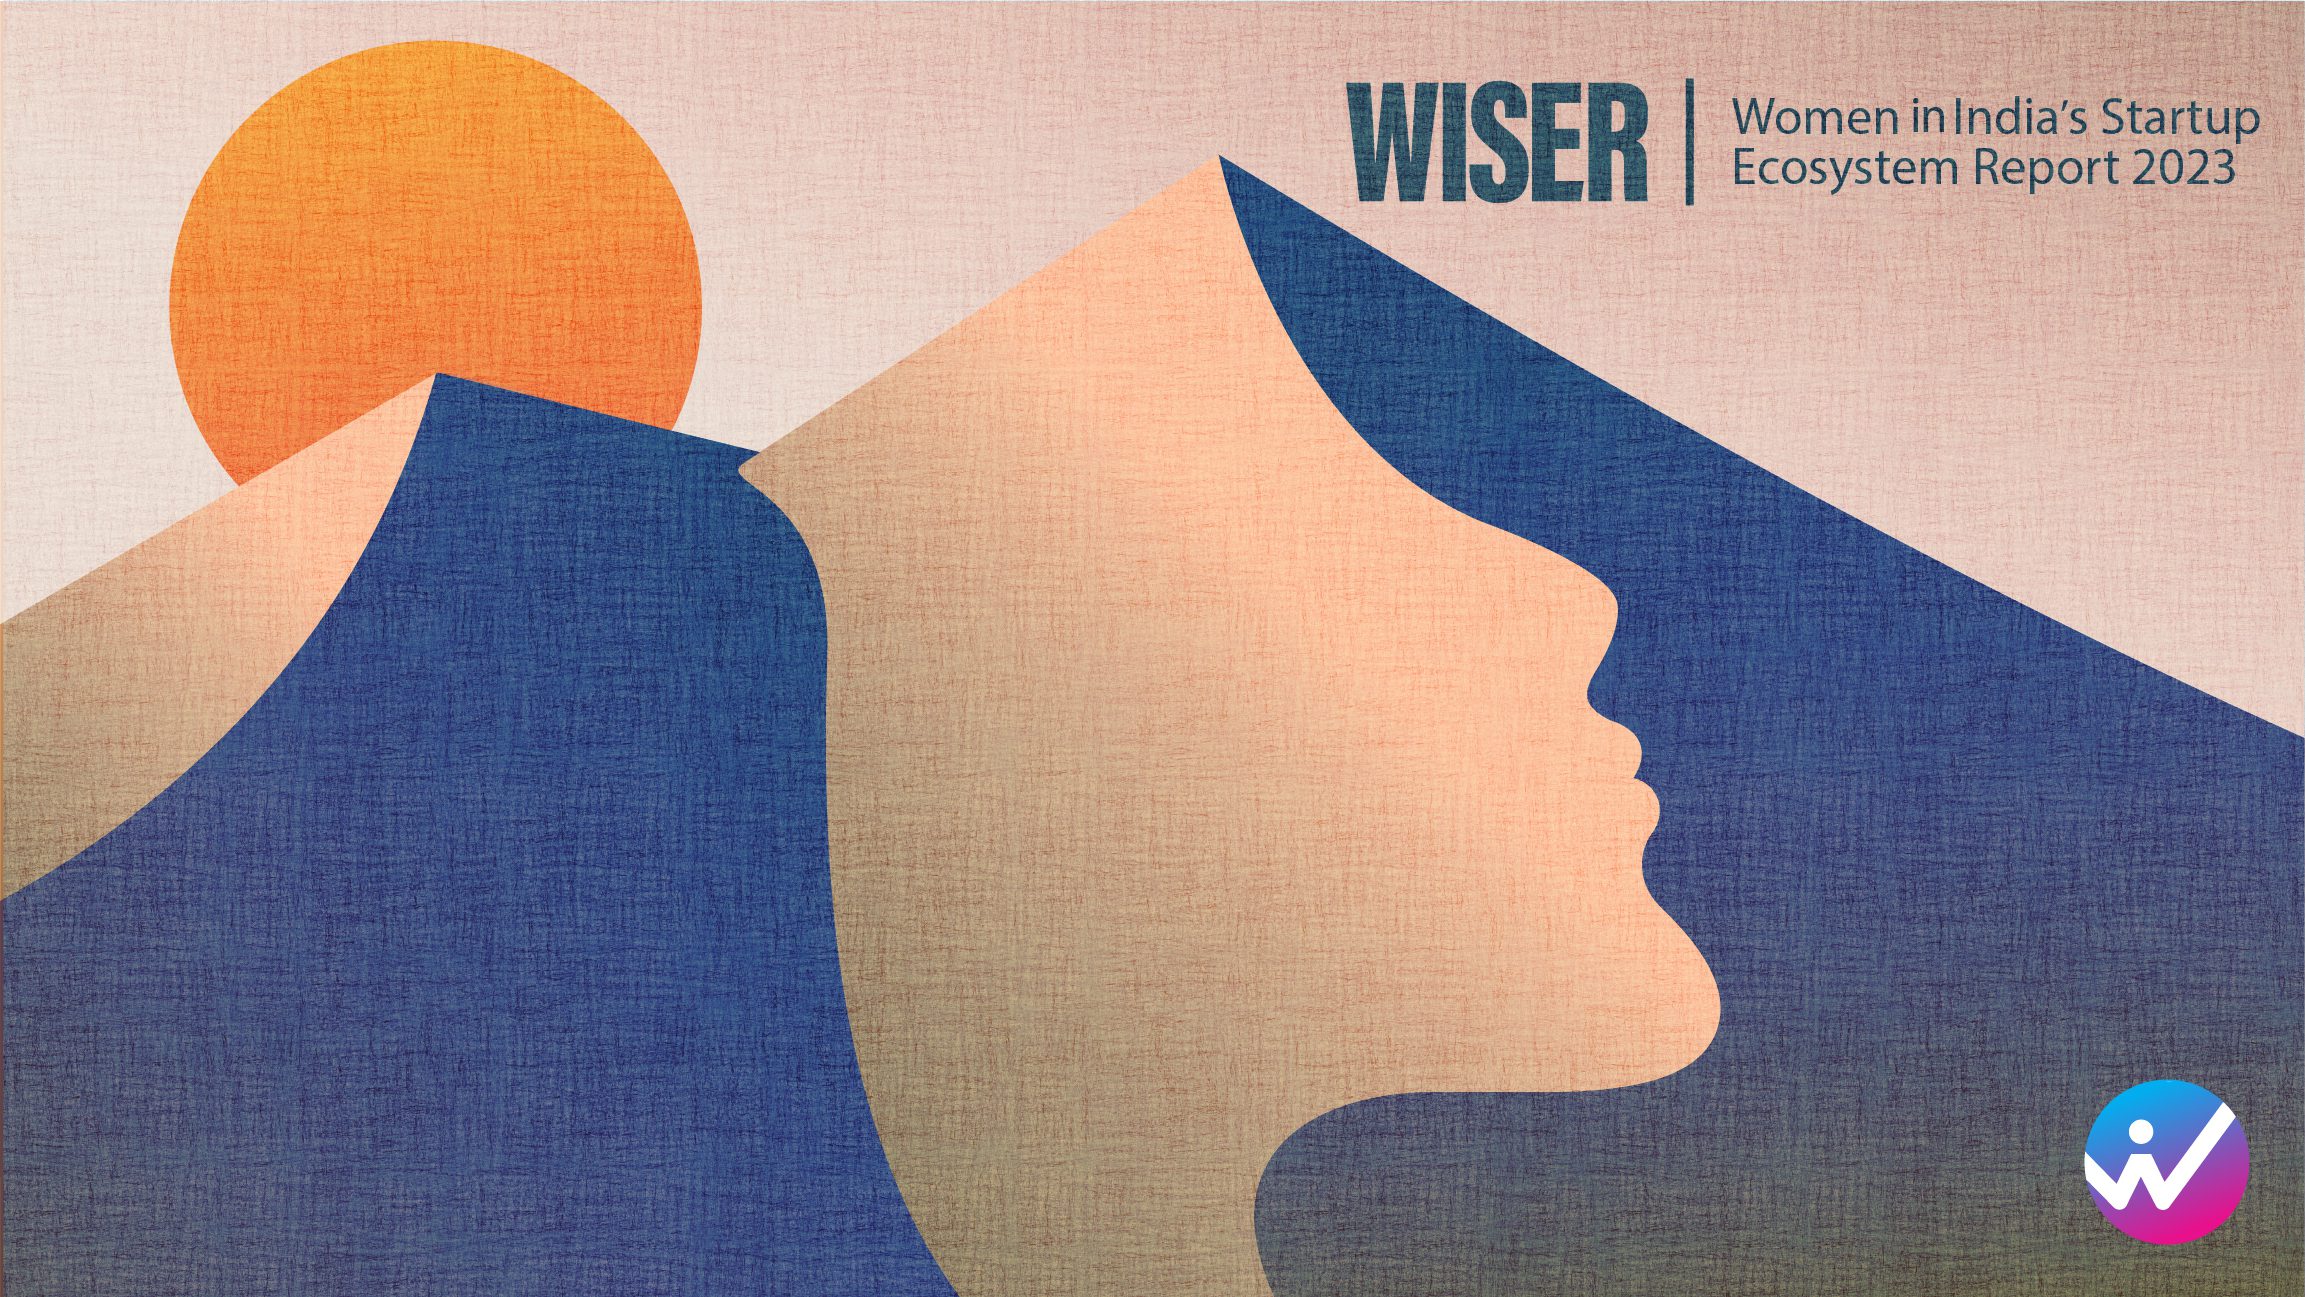 WISER 2023 finds that startups can lead the way on accelerating women’s workforce participation in India